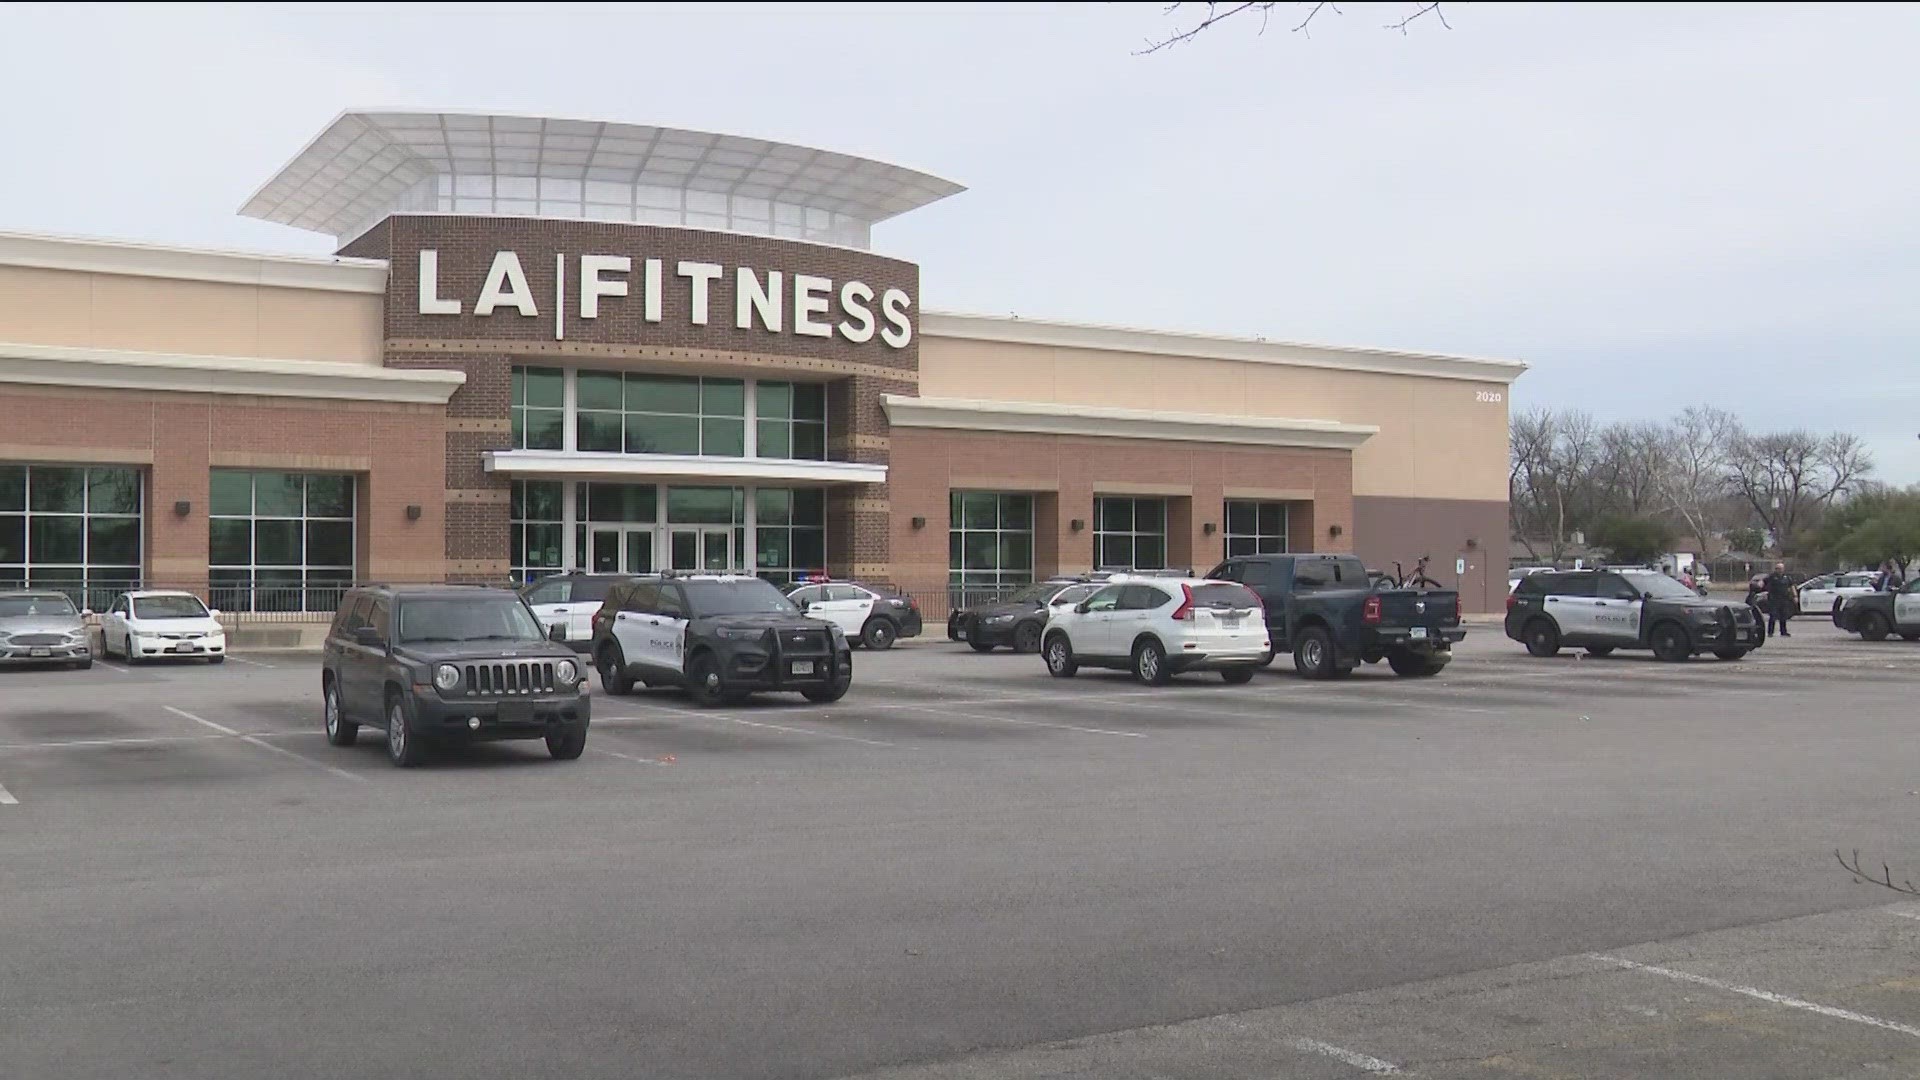 Austin police said the suspect stabbing someone inside the LA Fitness near Anderson Lane and Burnet Road Friday morning.